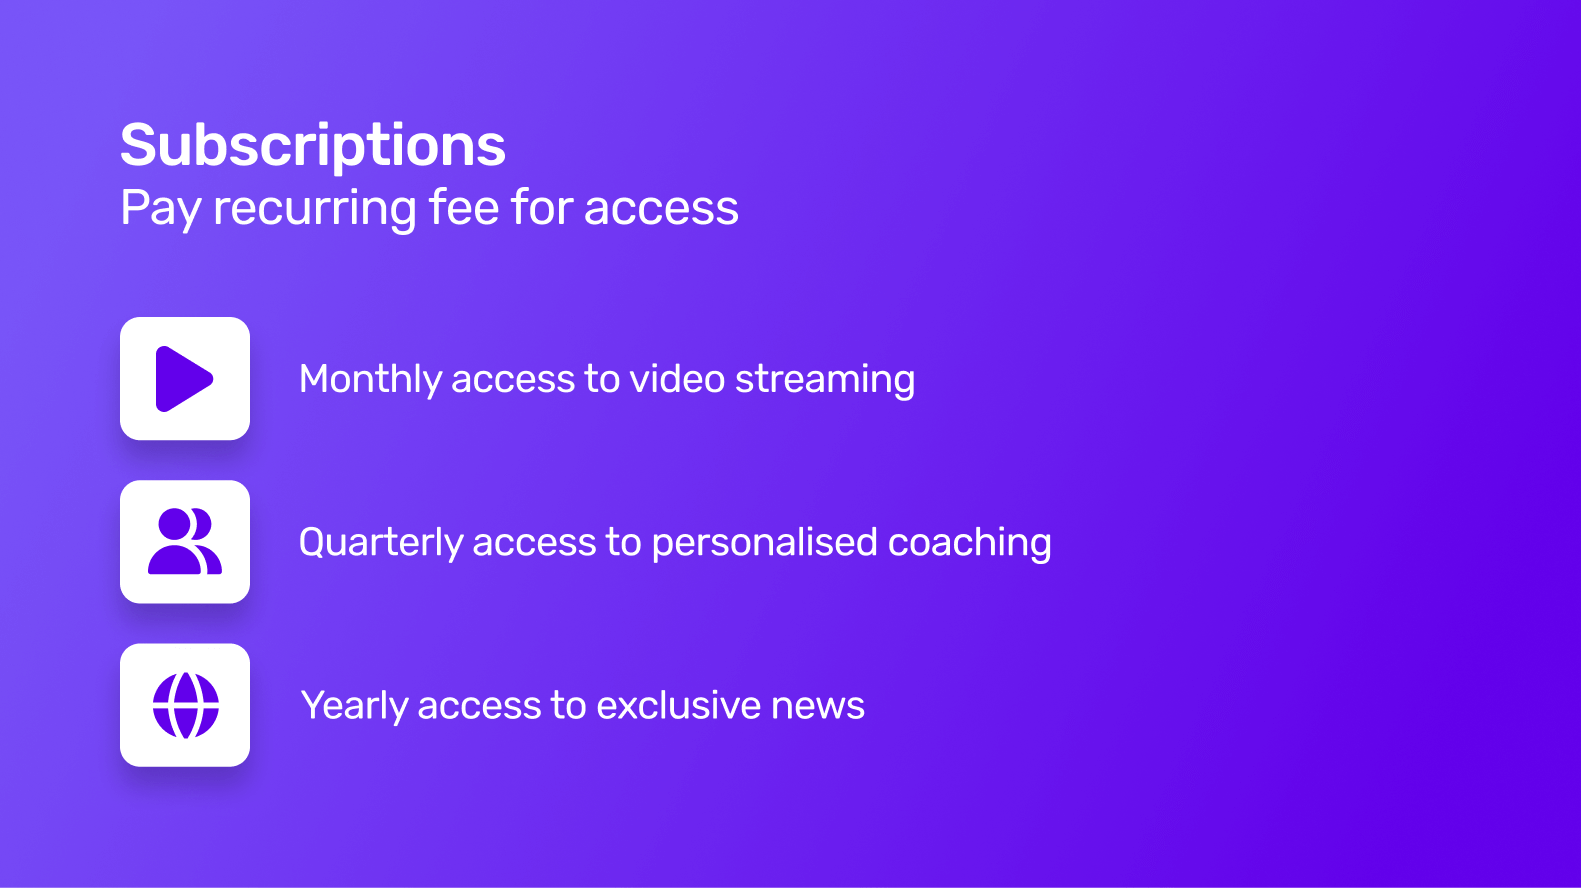 Subscription (pay a recurring fee for access) as a type of in-app purchase, listing monthly access to video streaming, quarterly access to personalised coaching and yearly access to exclusive news stories